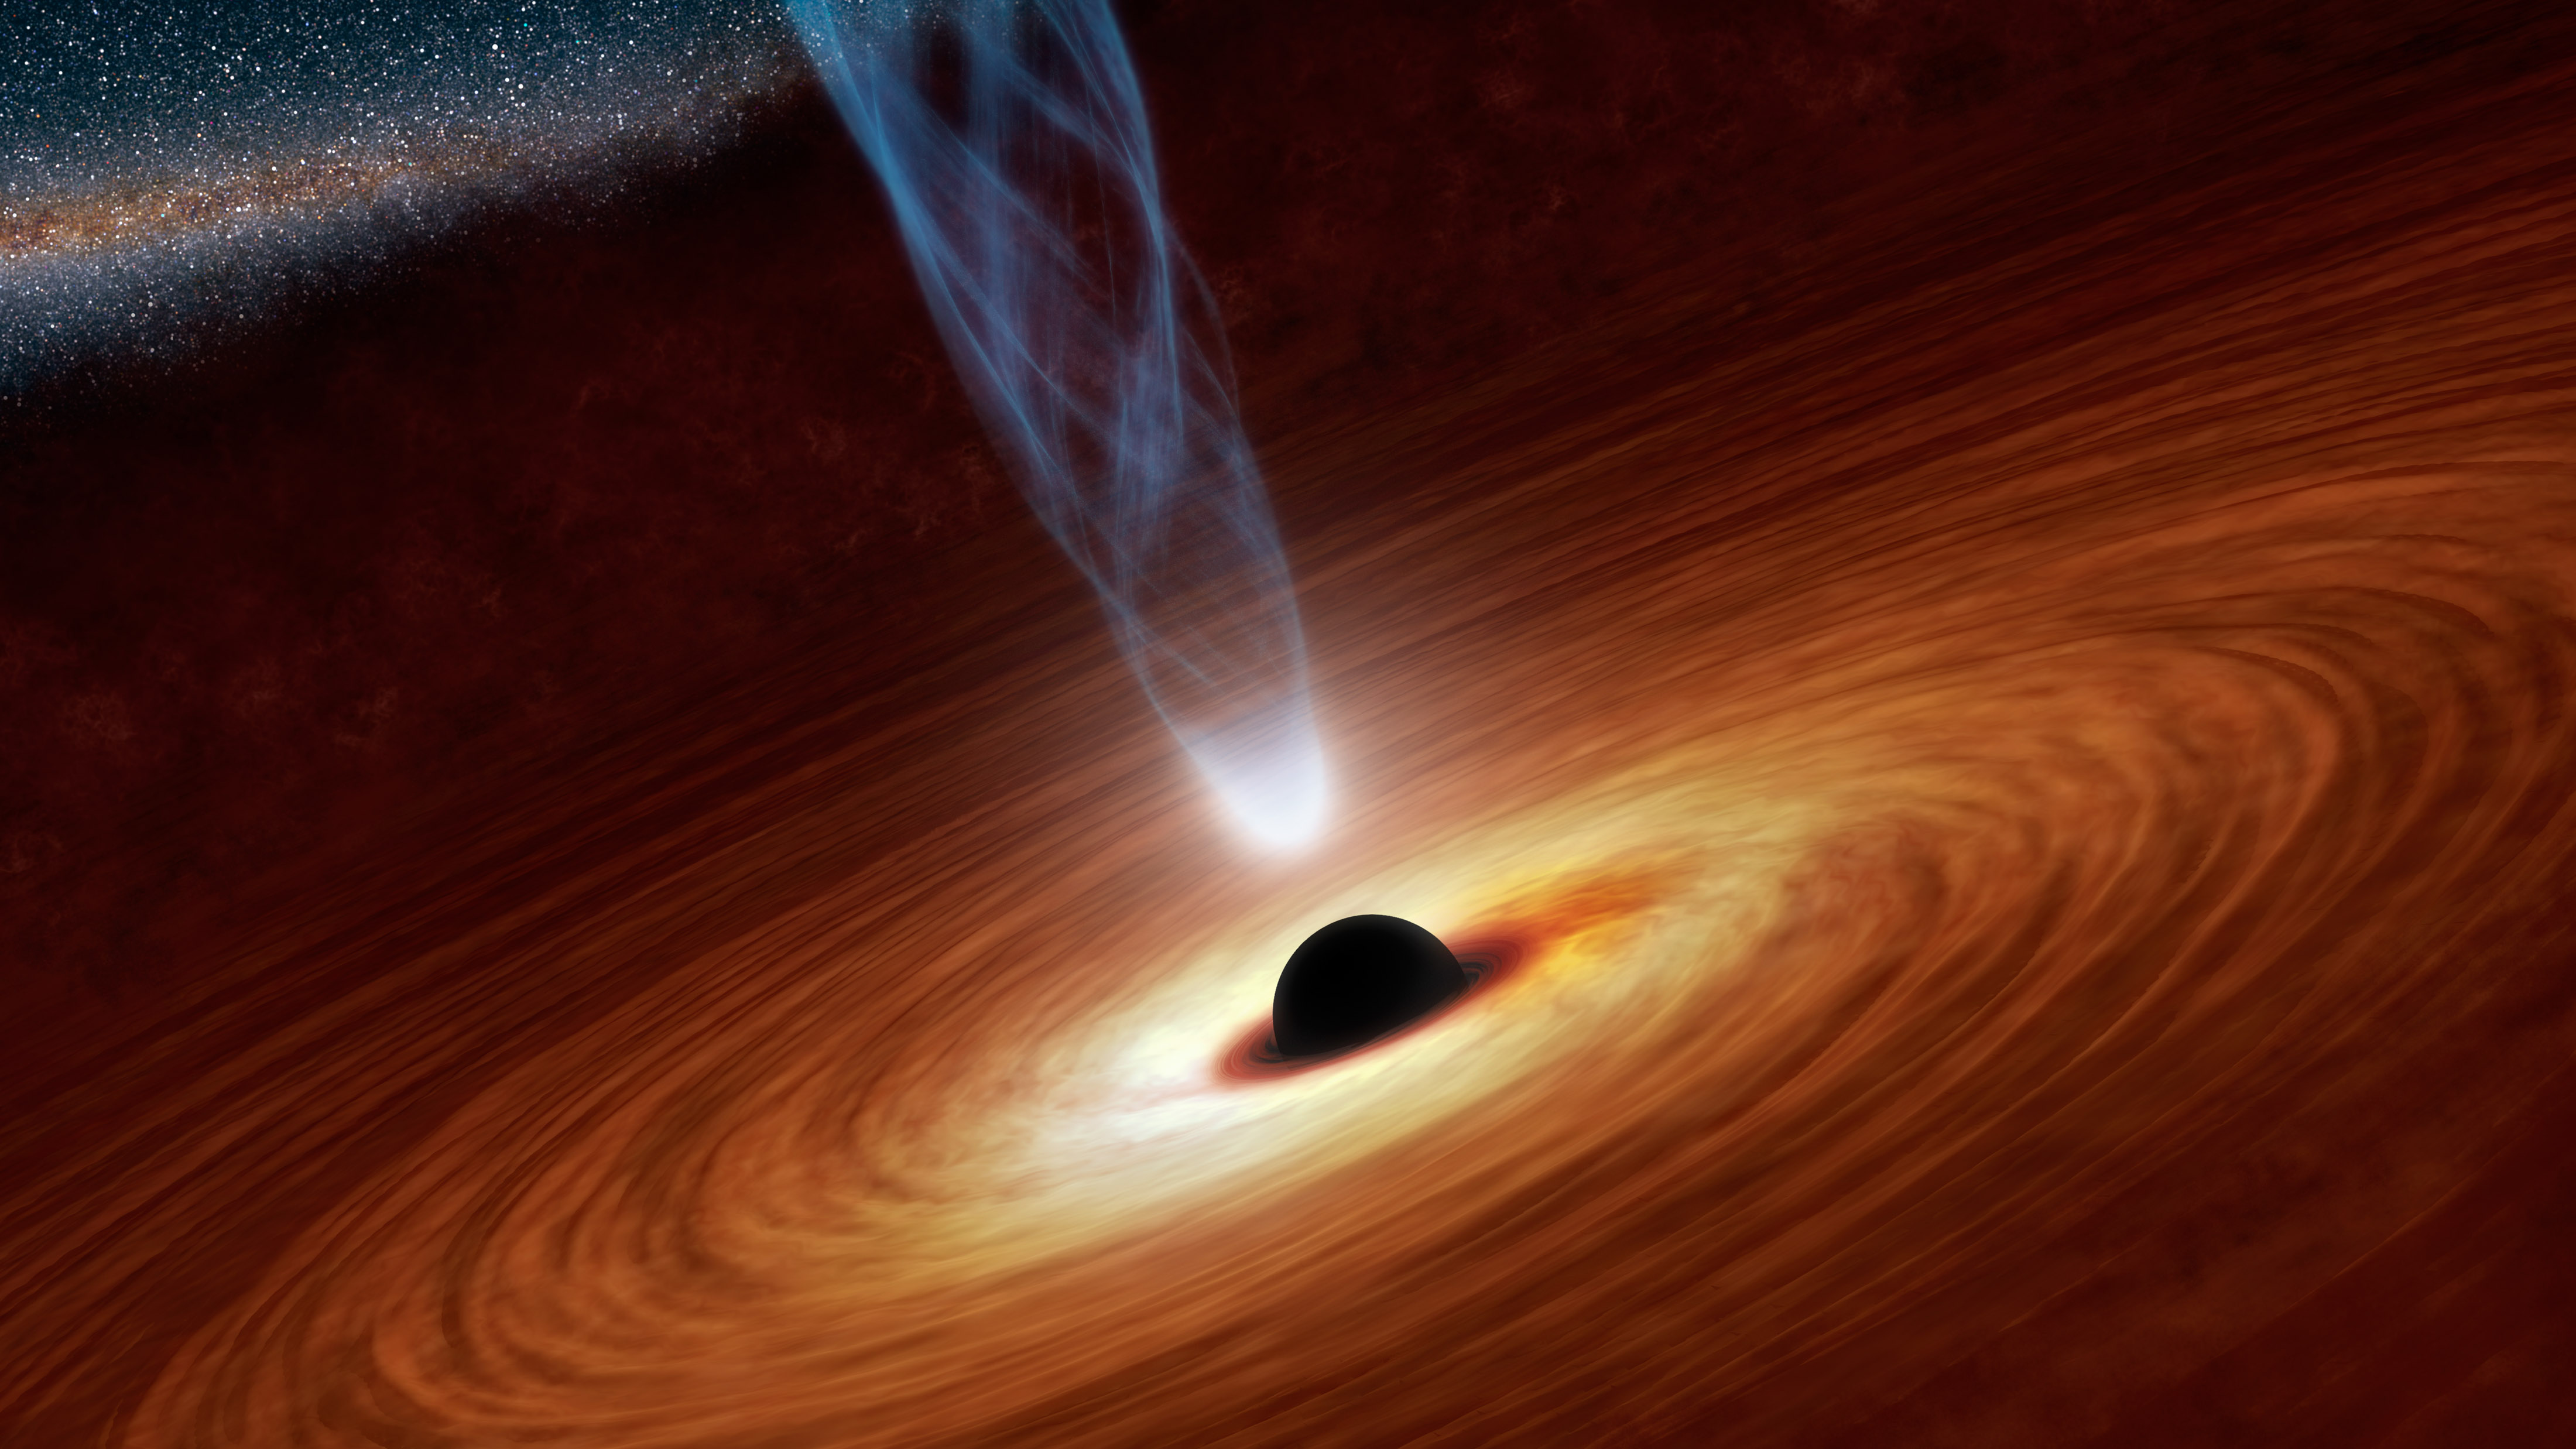 Understanding massive black hole formation: Researchers believe supersonic gas streams from the Big Bang may provide the answer